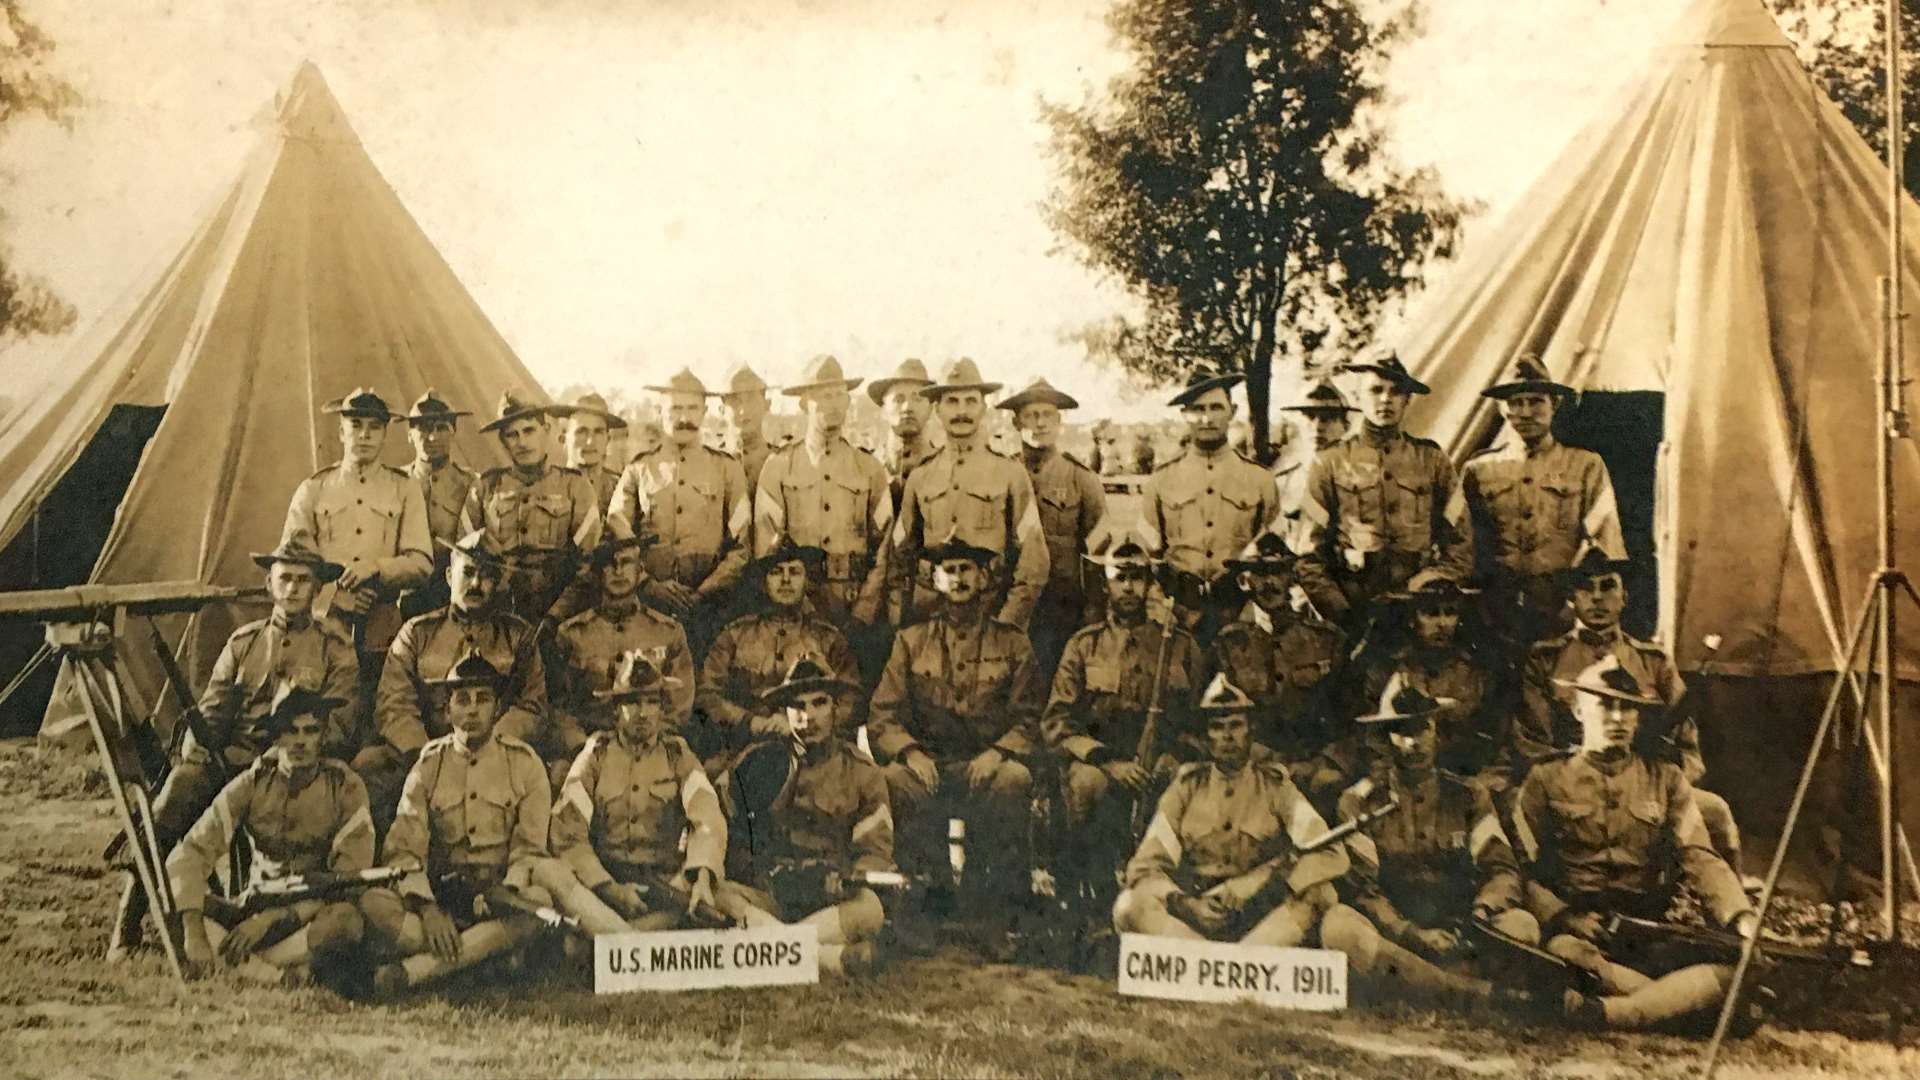 Competitors in 1911 at Camp Perry